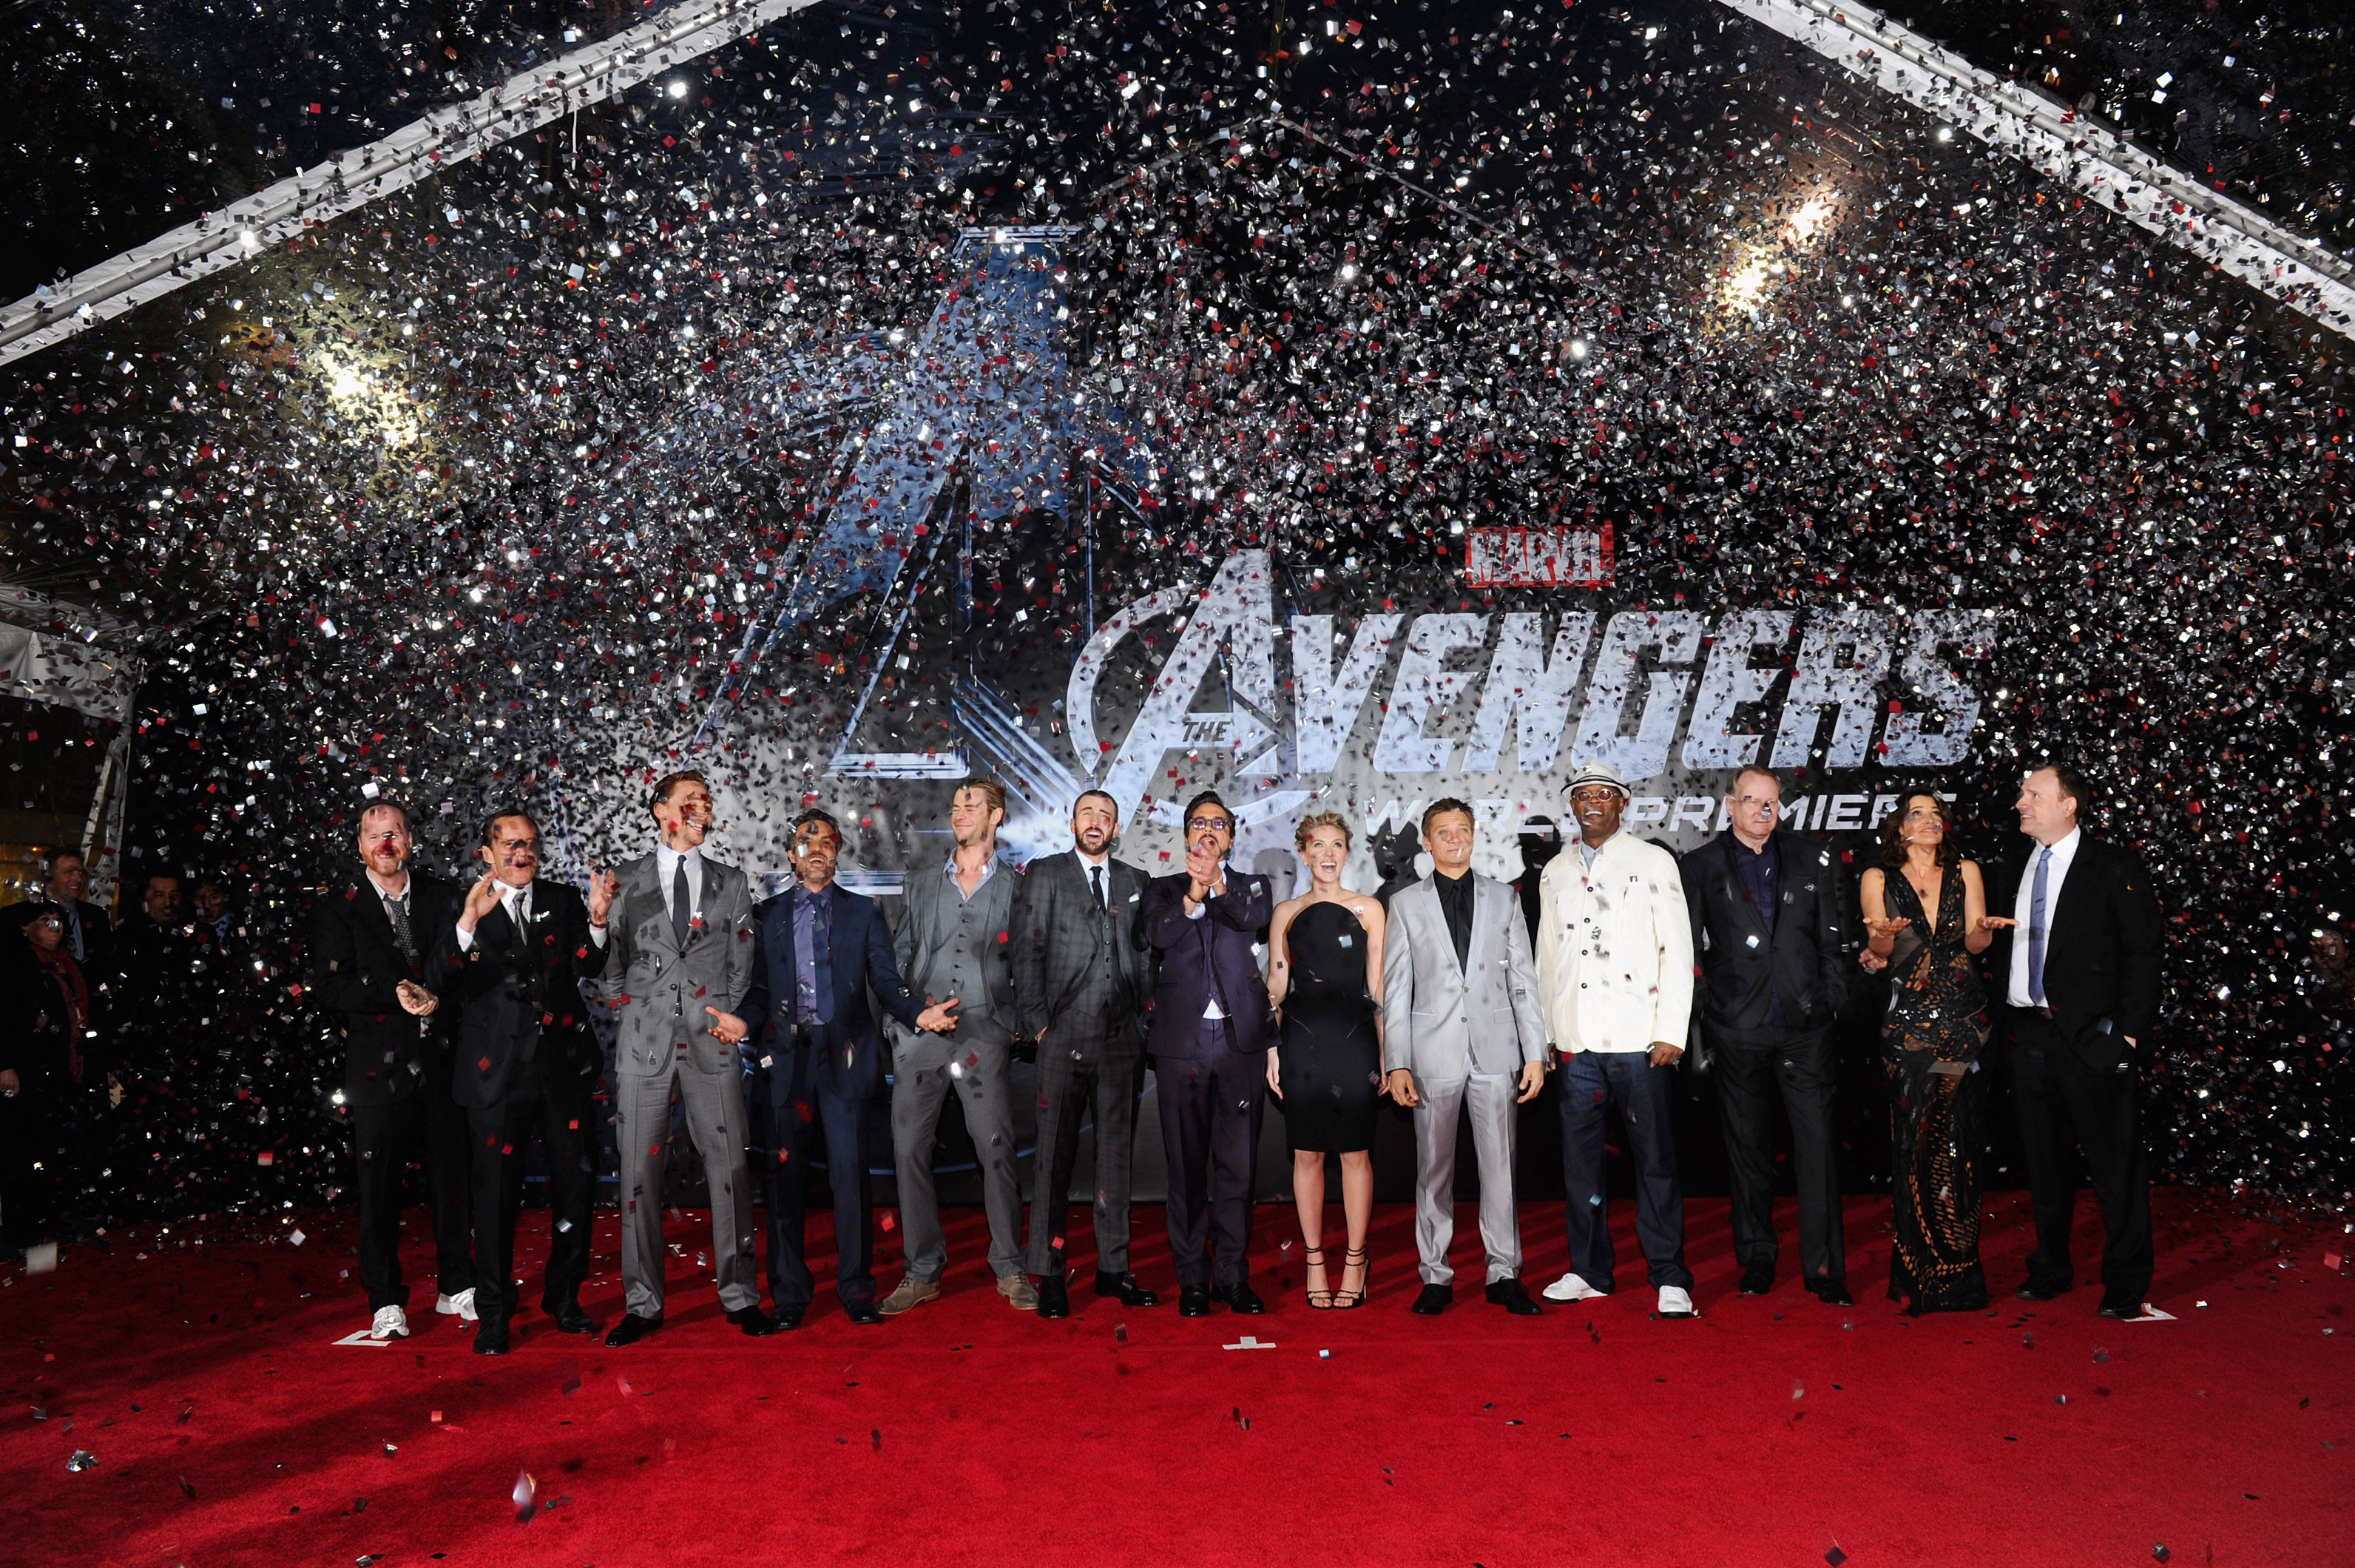 3184x2120 'The Avengers' World Premiere Red Carpet Pics, Plus Free Comic Book Day Info